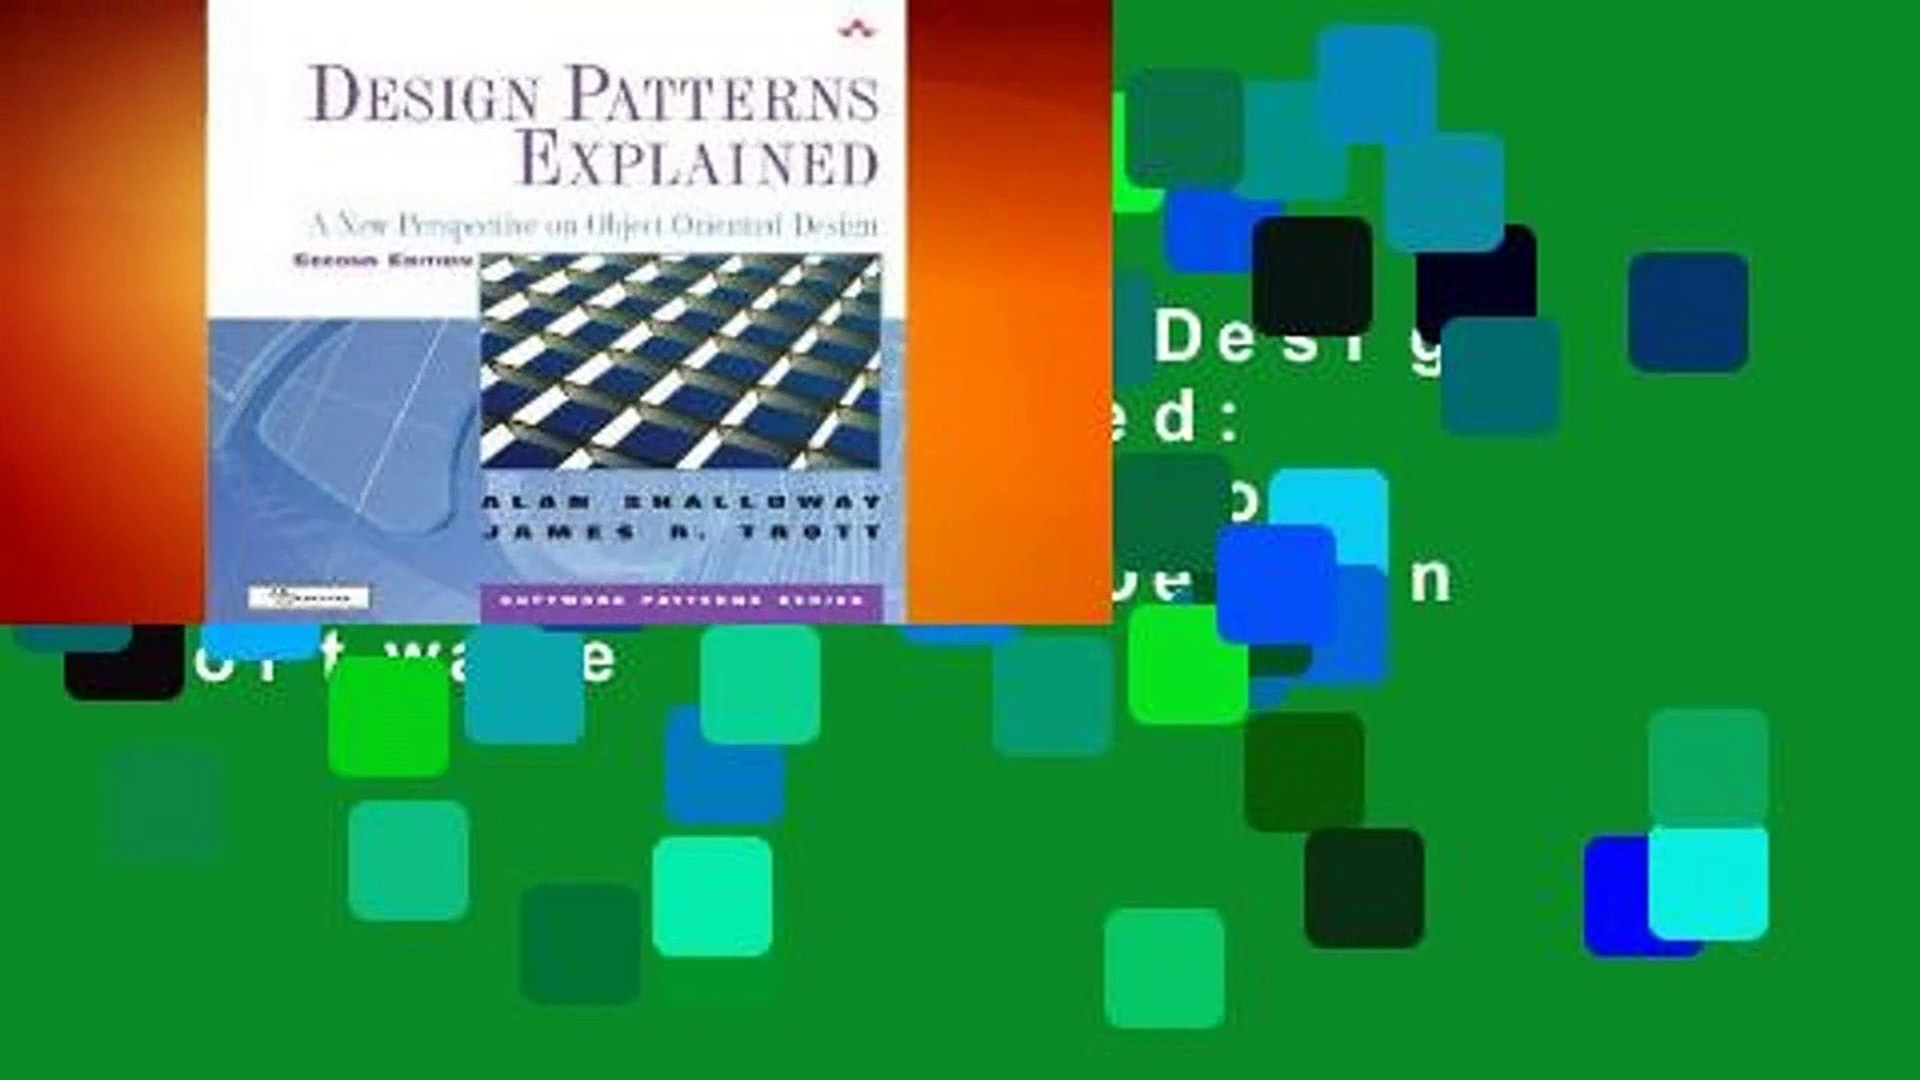 About For Books  Design Patterns Explained: A New Perspective on Object-Oriented Design (Software